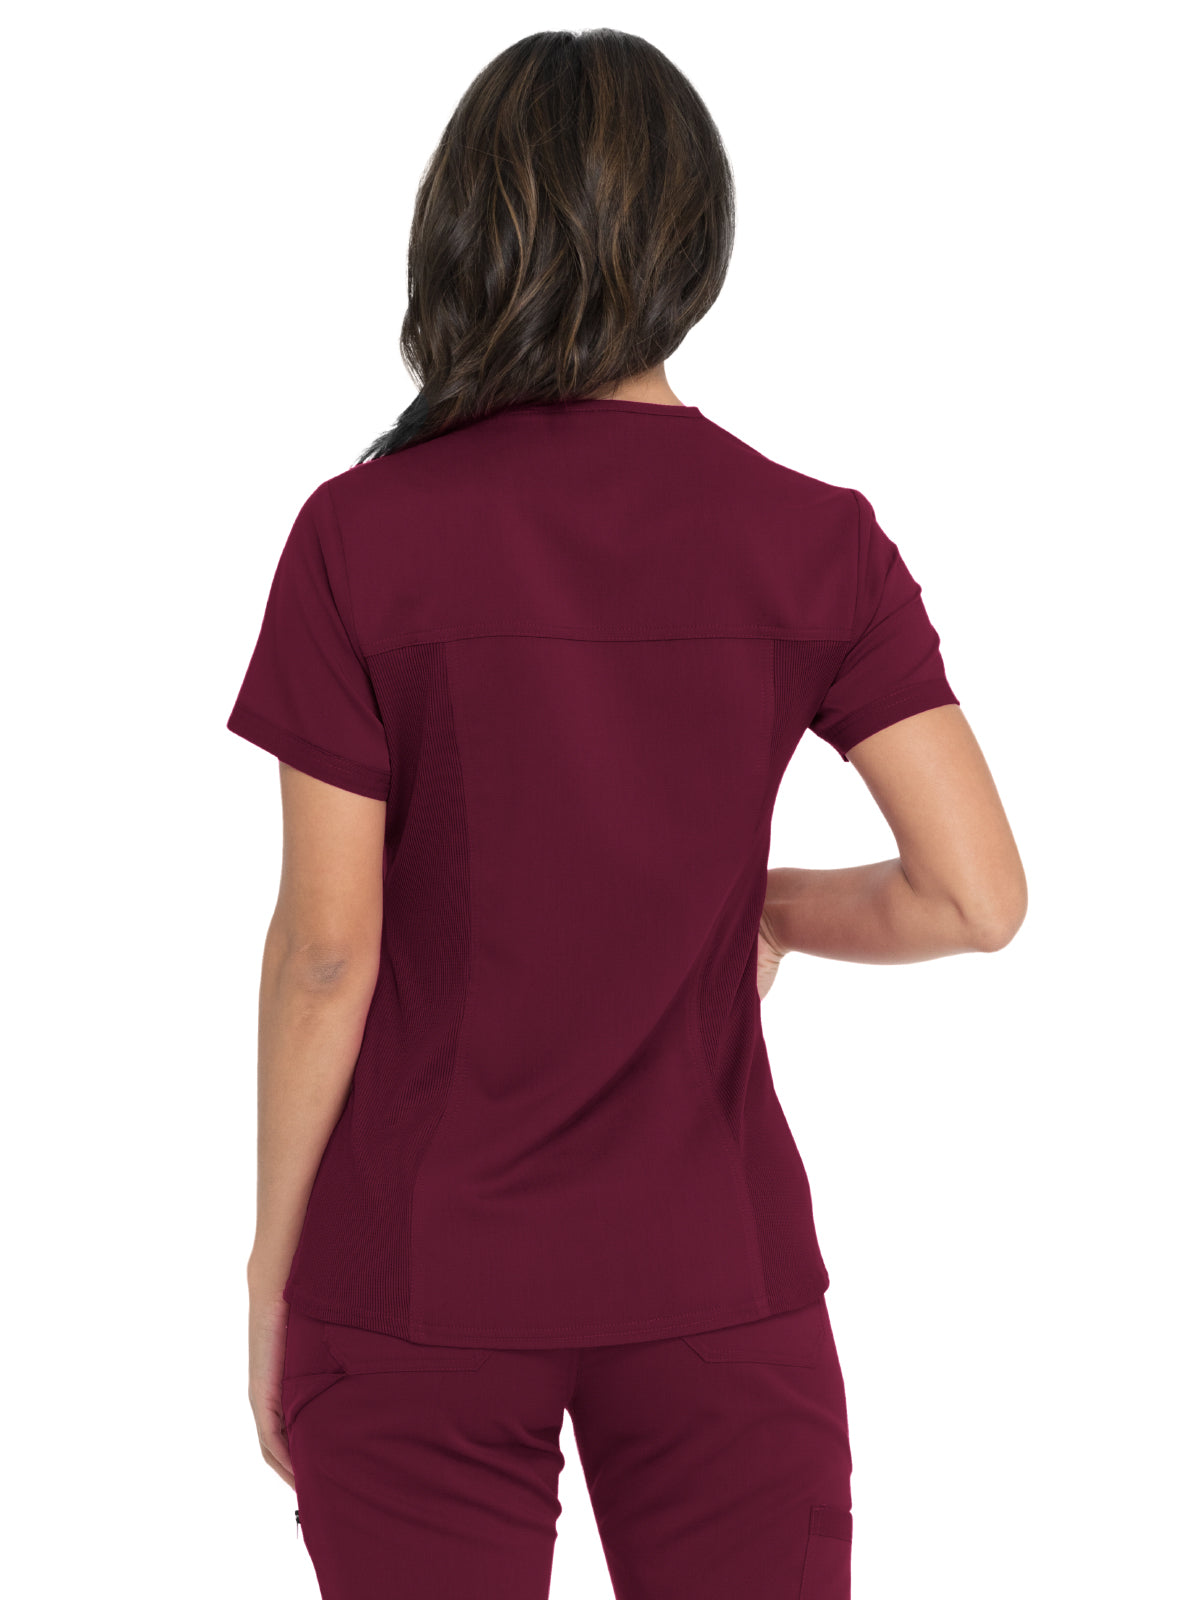 Women's V-Neck Top With Rib Knit Panels - DK870 - Wine